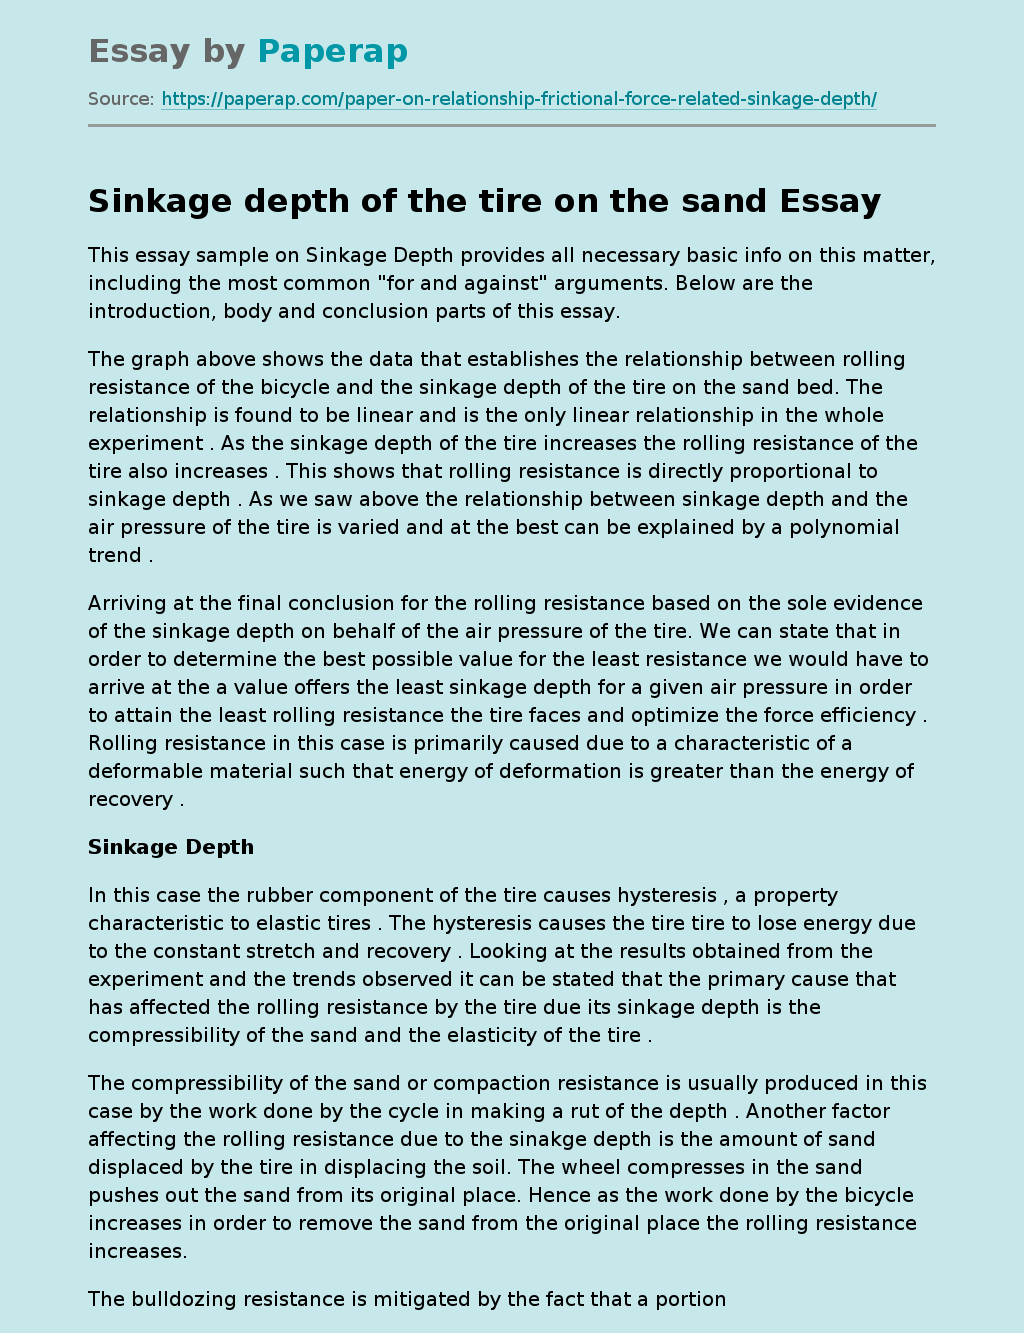 Sinkage depth of the tire on the sand